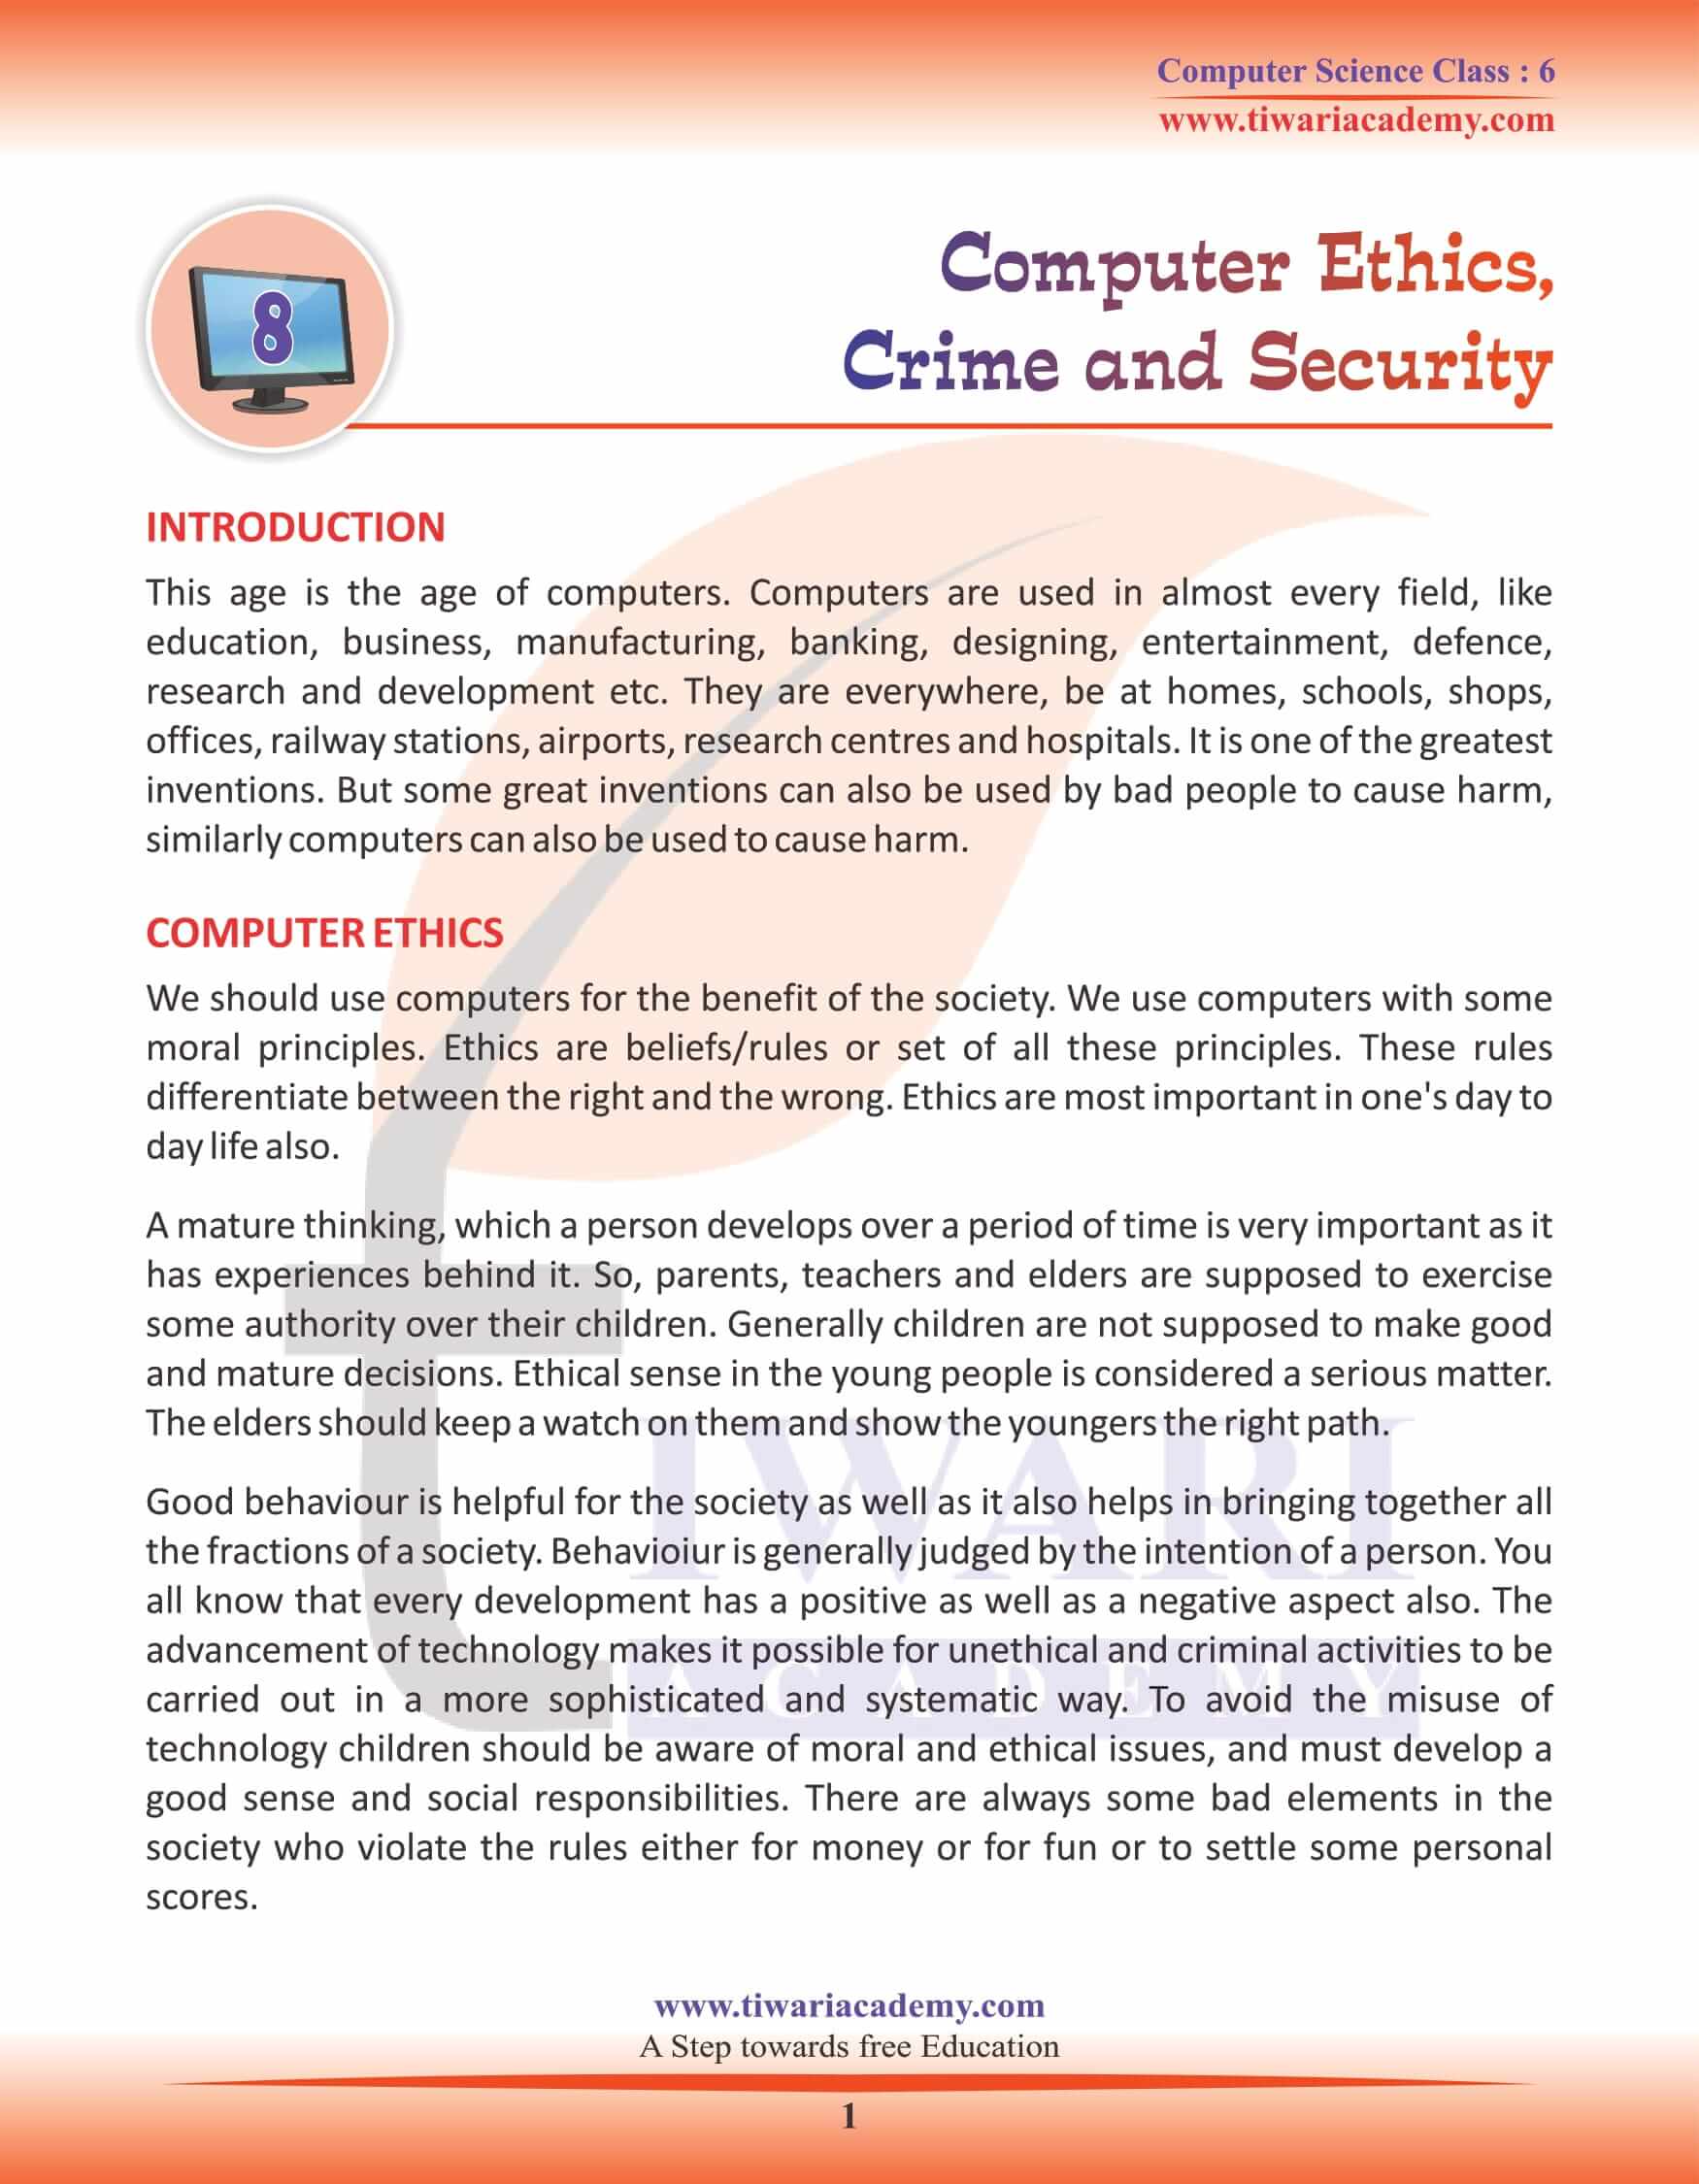 Class 6 Computer Science Chapter 8 Computer Ethics, Crime and Security